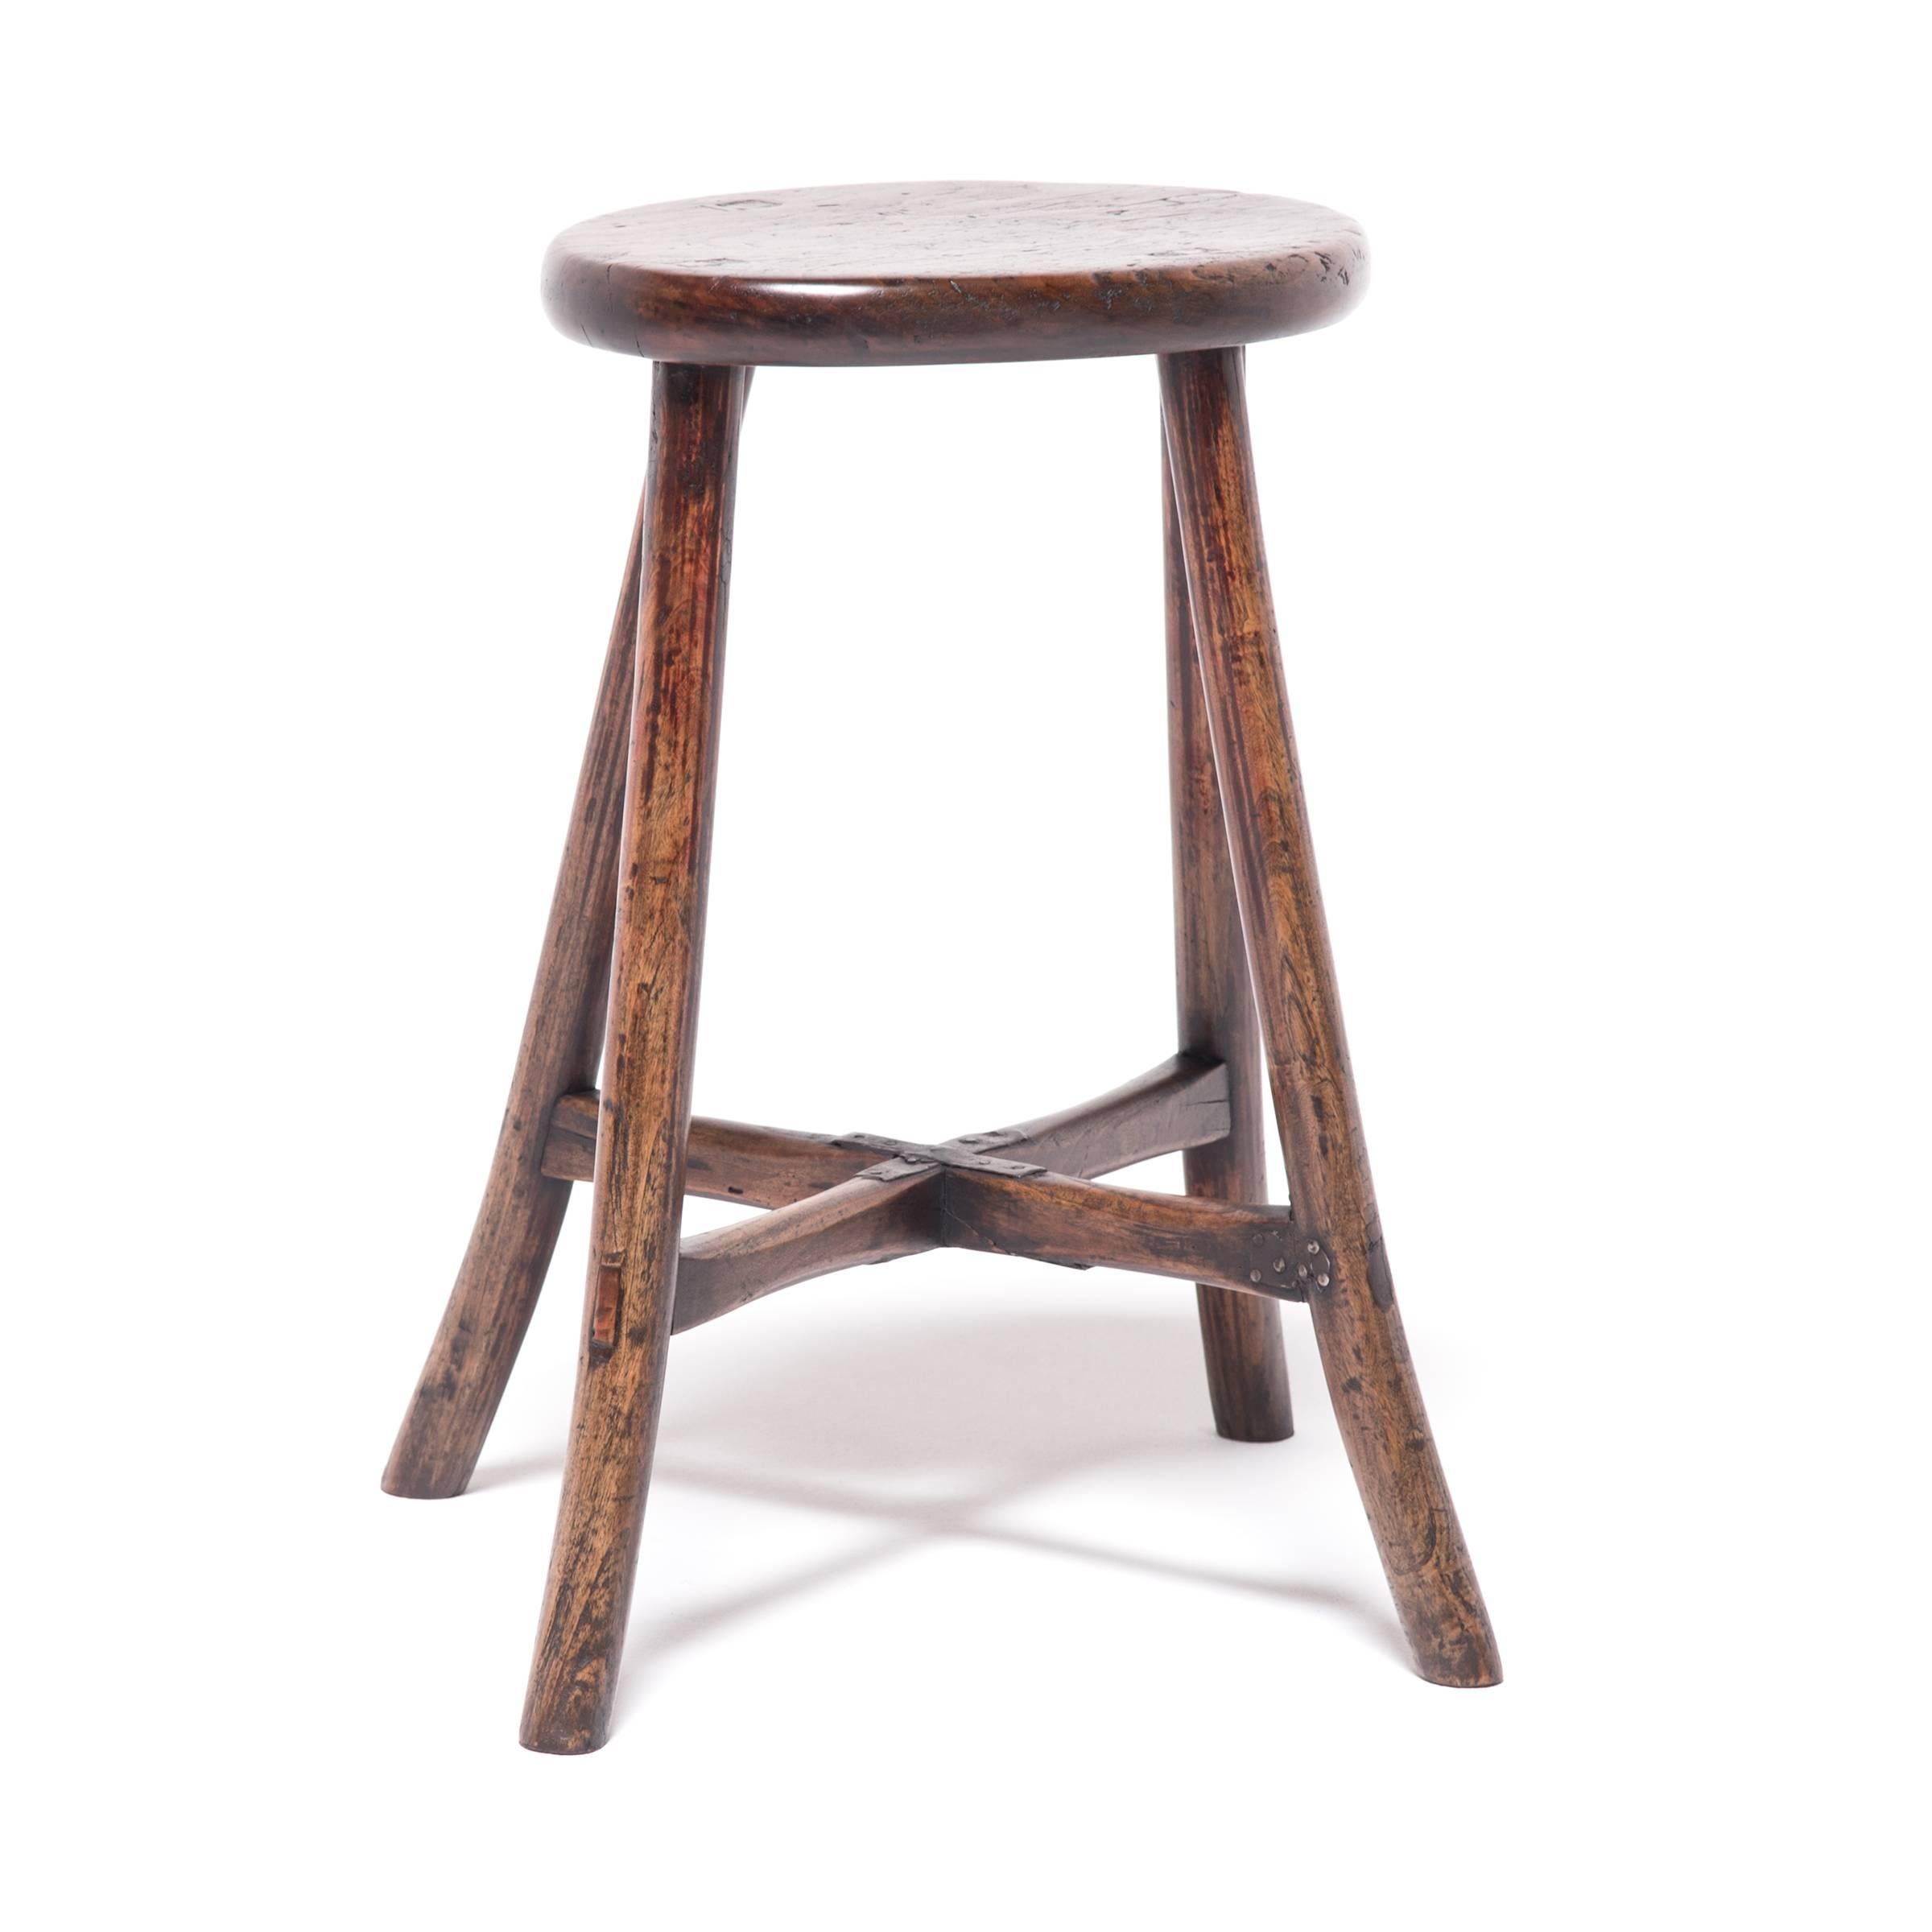 Qing Chinese Provincial Oval Stool with Flared Legs